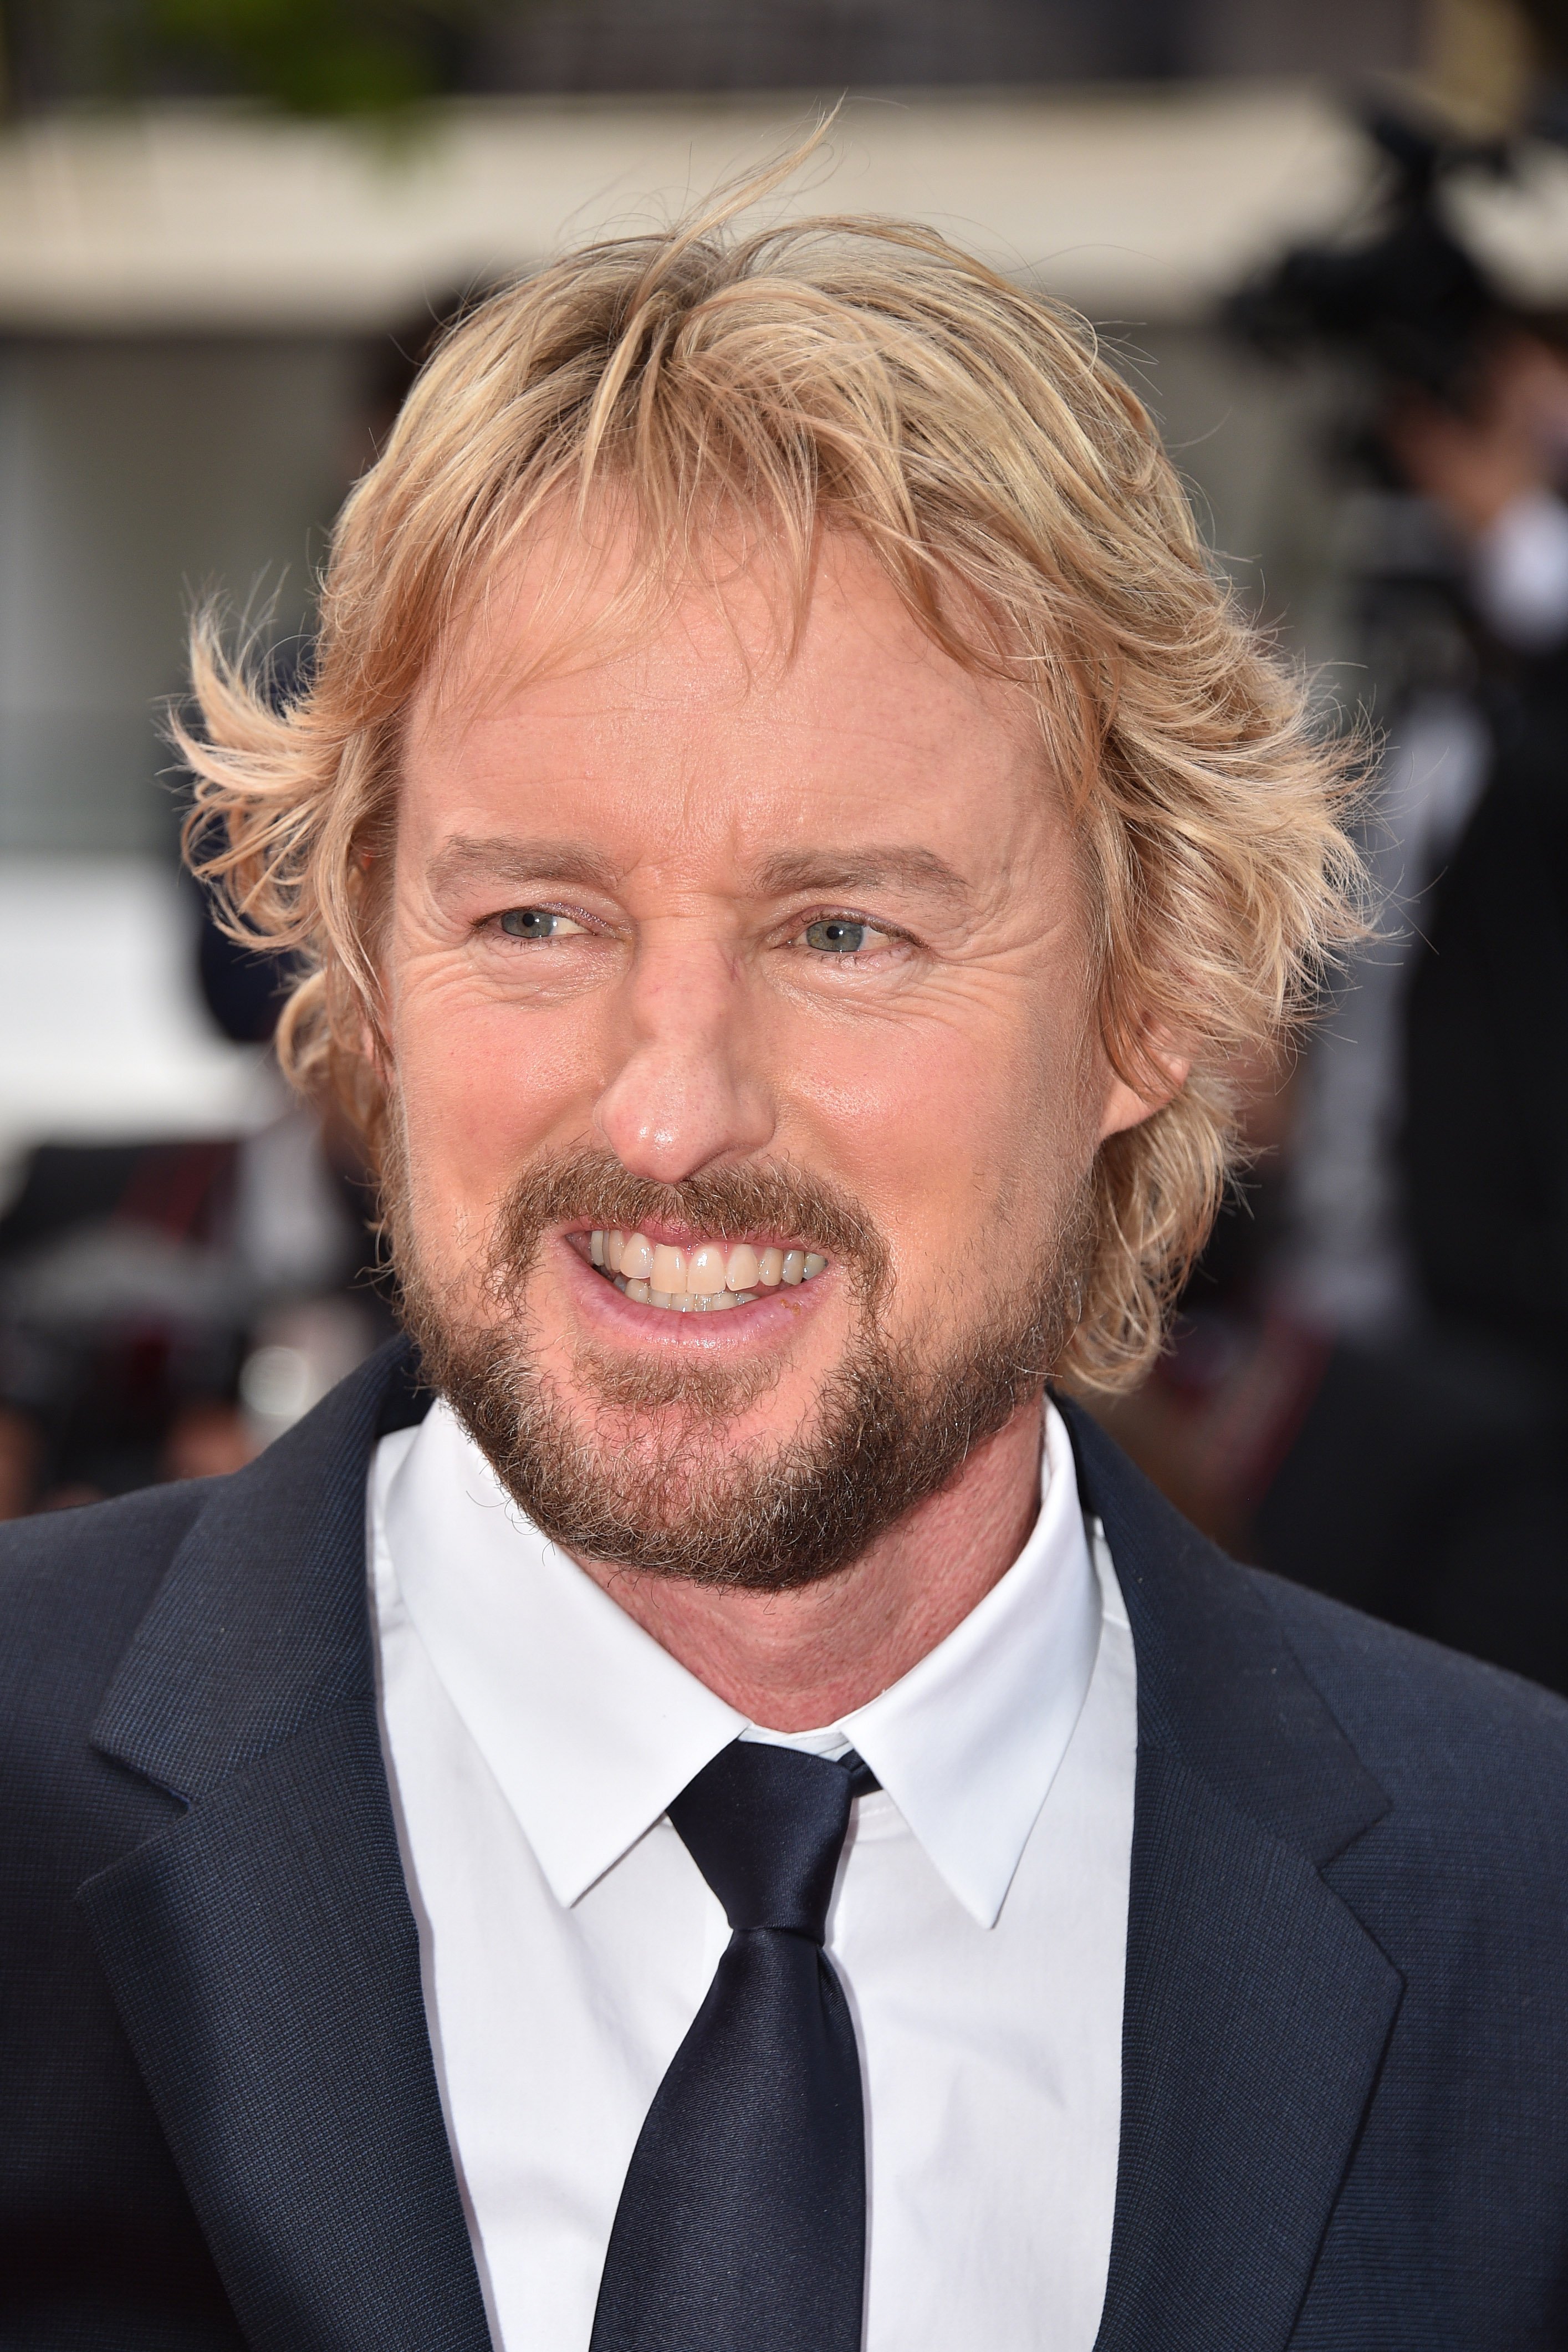     Owen Wilson attended "French Dispatch" screened during the 74th Annual Cannes Film Festival on July 12, 2021 in Cannes, France.  |  Source: Getty Images